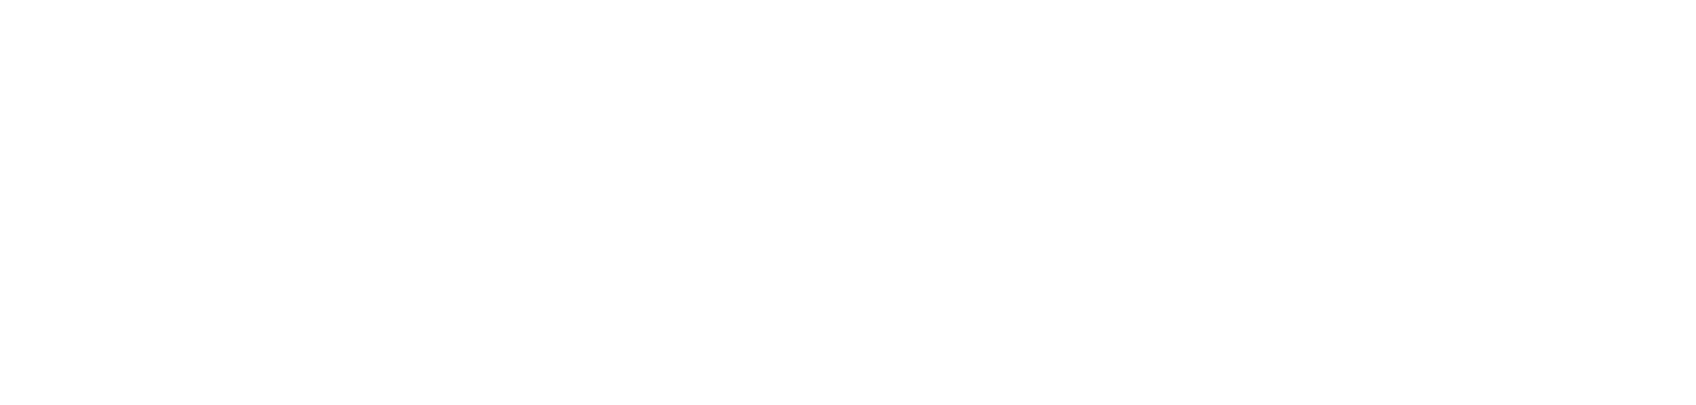 X CHANGE Podcast Series logo in white